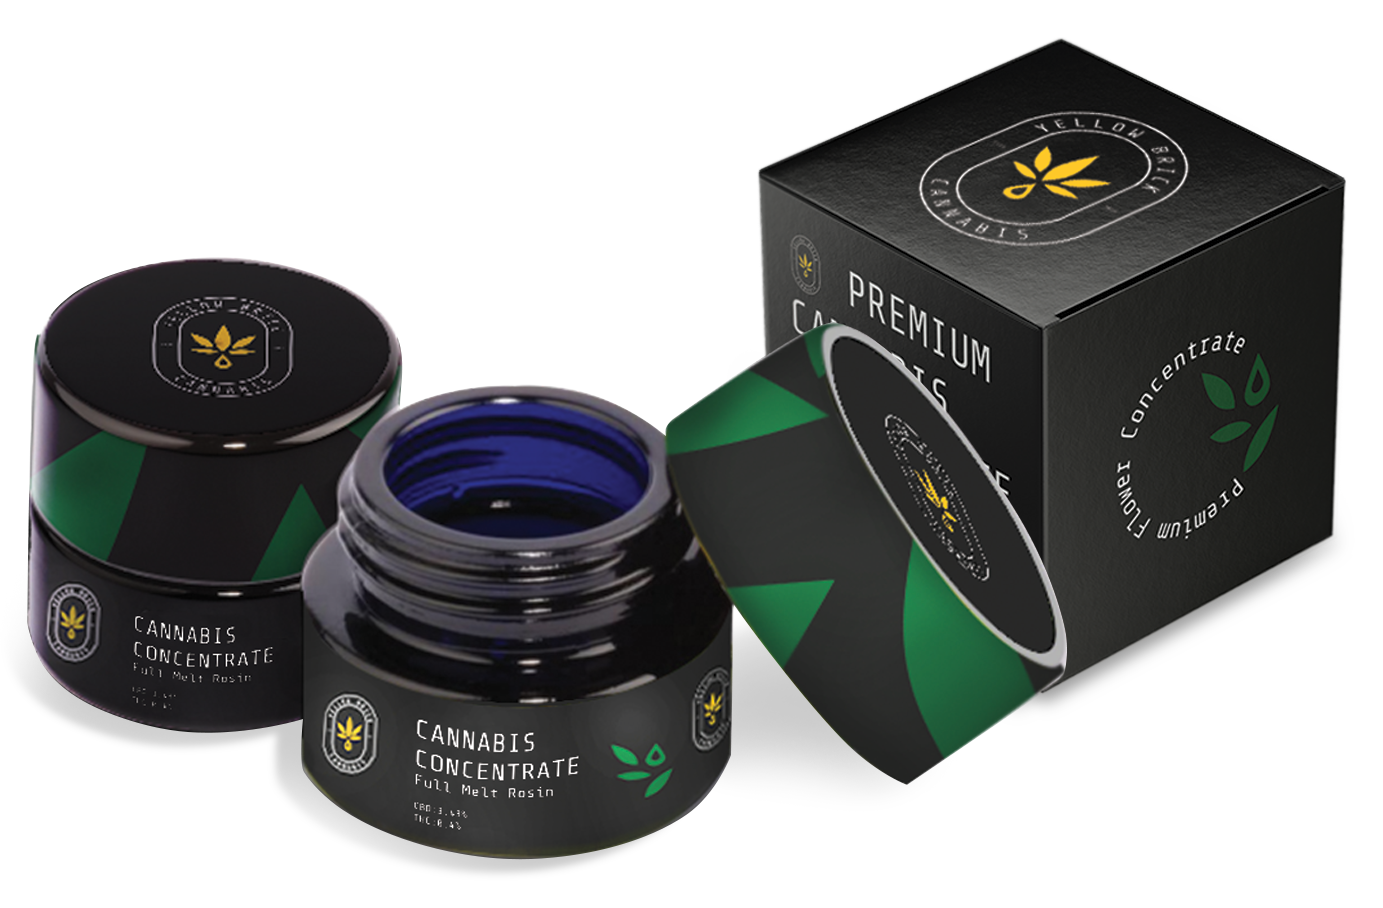 Cannabis Concentrate Jars and Box from Headie Supplies